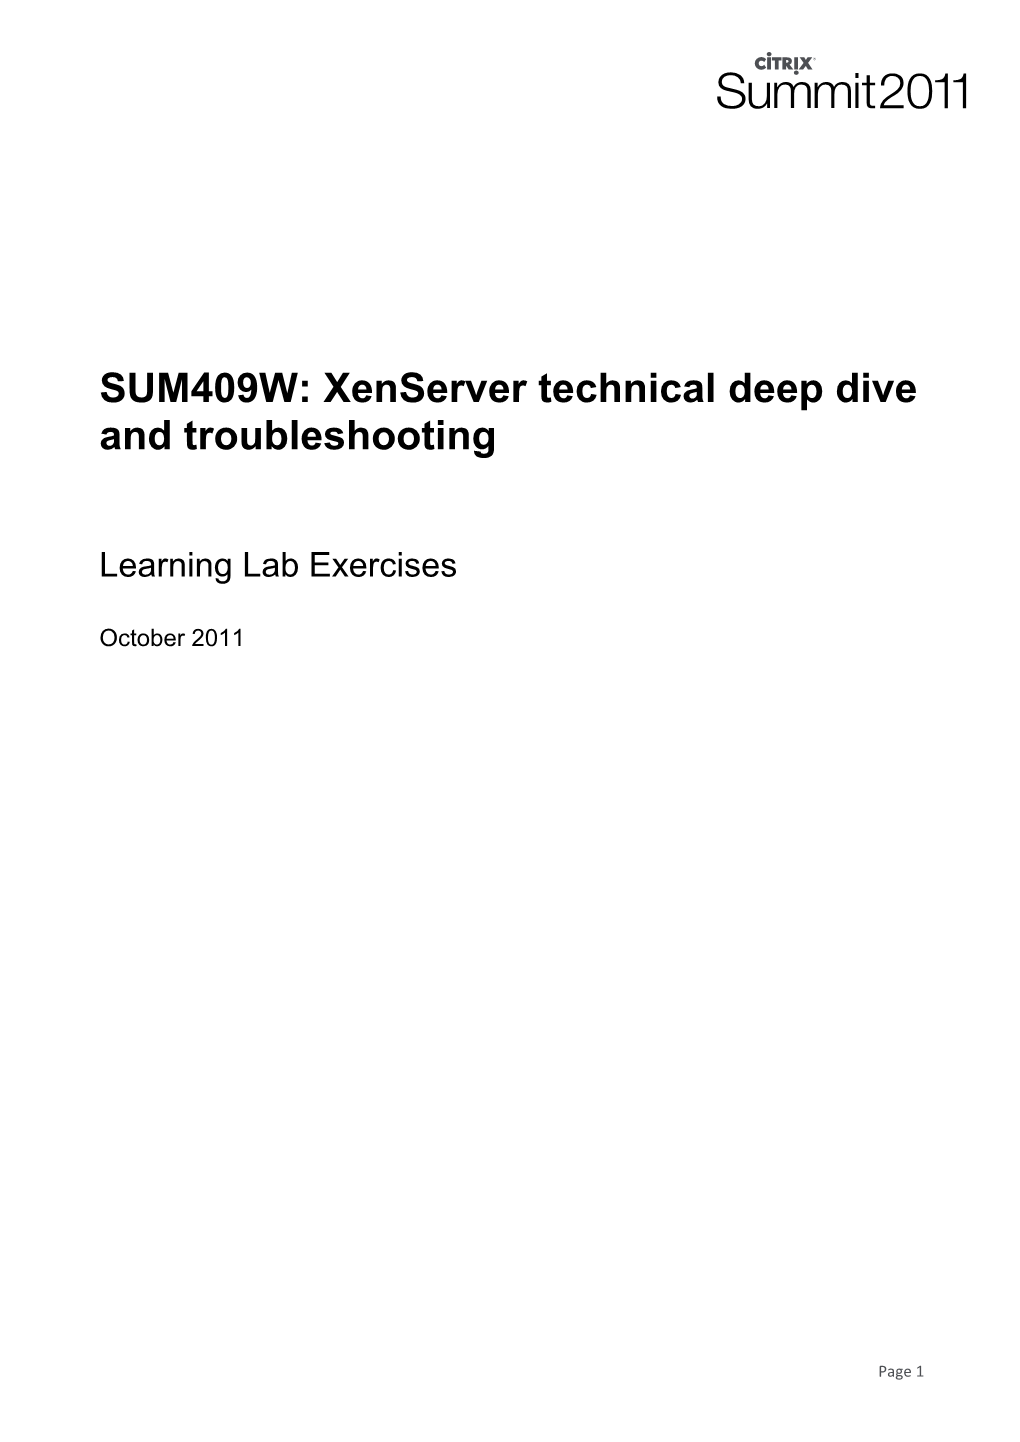 Xenserver Technical Deep Dive and Troubleshooting